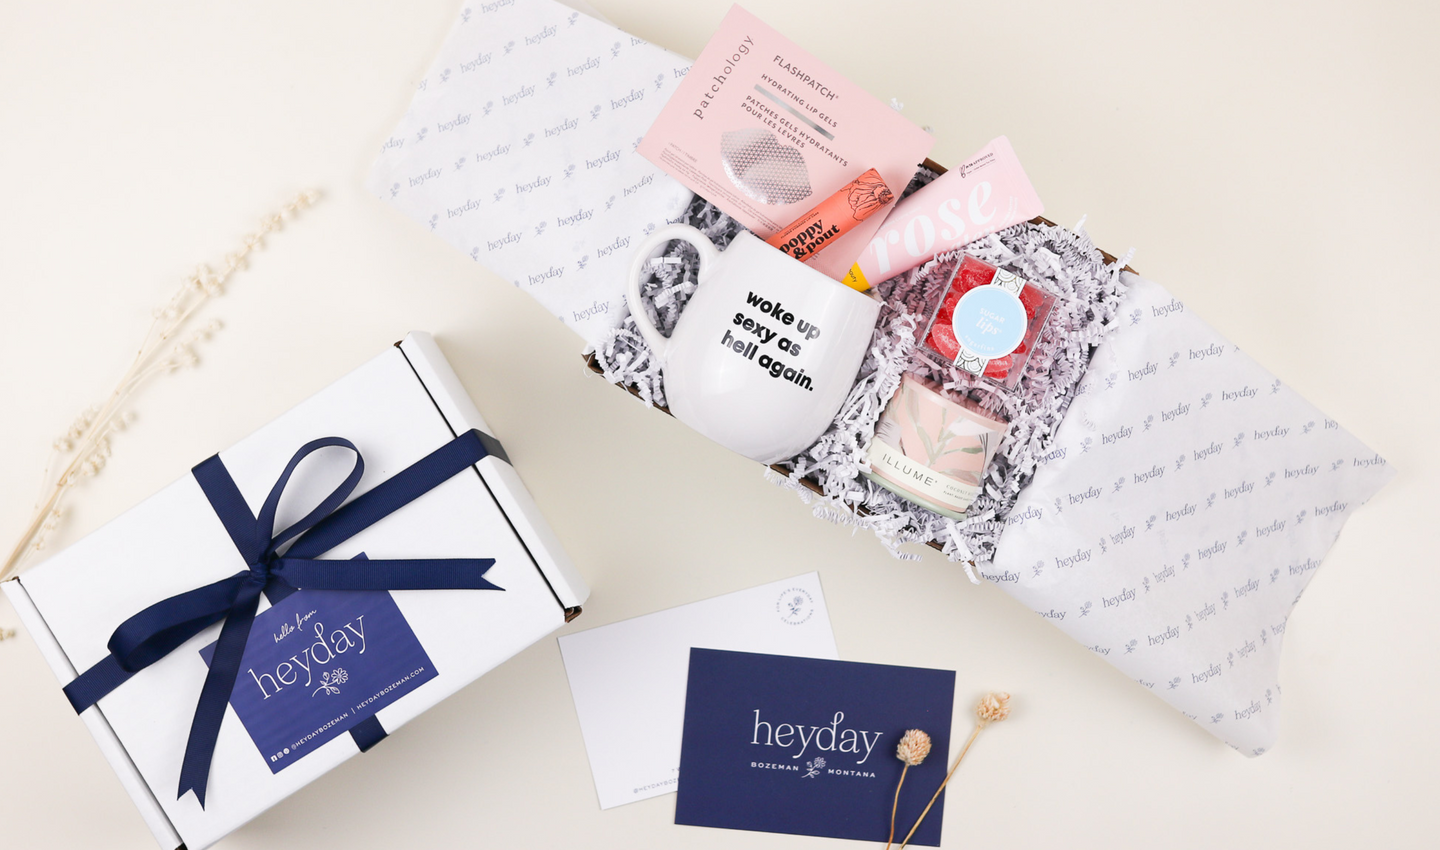 something for everyone - gift boxes - heyday